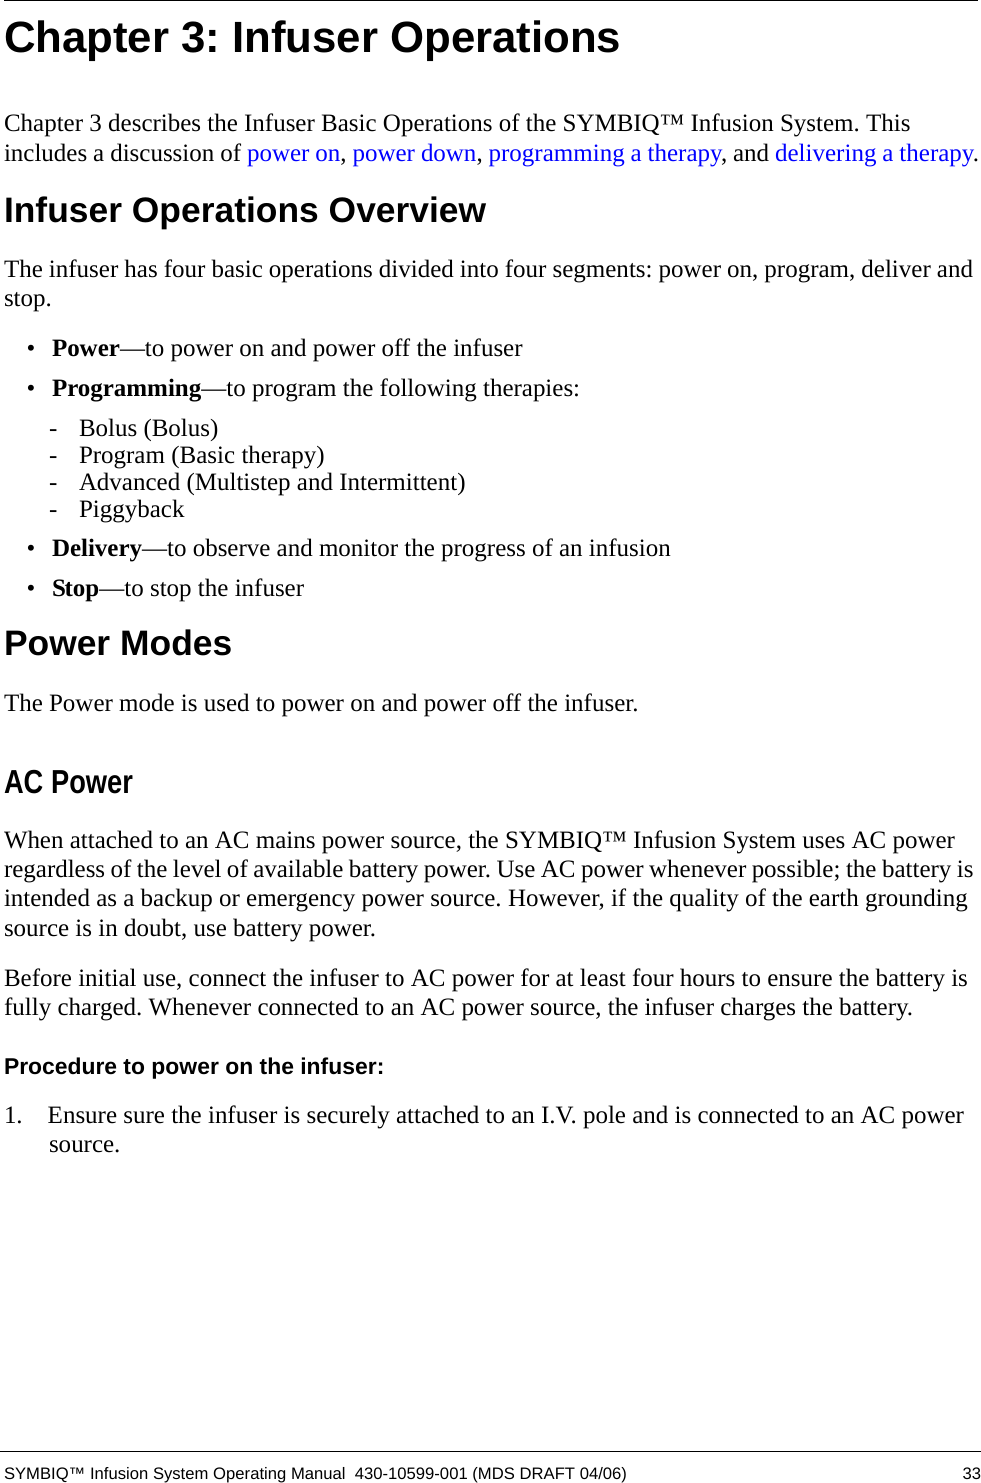  SYMBIQ™ Infusion System Operating Manual  430-10599-001 (MDS DRAFT 04/06) 33Chapter 3: Infuser OperationsChapter 3 describes the Infuser Basic Operations of the SYMBIQ™ Infusion System. This includes a discussion of power on, power down, programming a therapy, and delivering a therapy.Infuser Operations OverviewThe infuser has four basic operations divided into four segments: power on, program, deliver and stop.•Power—to power on and power off the infuser•Programming—to program the following therapies:- Bolus (Bolus)- Program (Basic therapy)- Advanced (Multistep and Intermittent)- Piggyback•Delivery—to observe and monitor the progress of an infusion •Stop—to stop the infuserPower ModesThe Power mode is used to power on and power off the infuser.AC PowerWhen attached to an AC mains power source, the SYMBIQ™ Infusion System uses AC power regardless of the level of available battery power. Use AC power whenever possible; the battery is intended as a backup or emergency power source. However, if the quality of the earth grounding source is in doubt, use battery power.Before initial use, connect the infuser to AC power for at least four hours to ensure the battery is fully charged. Whenever connected to an AC power source, the infuser charges the battery.Procedure to power on the infuser:1.  Ensure sure the infuser is securely attached to an I.V. pole and is connected to an AC power source. 